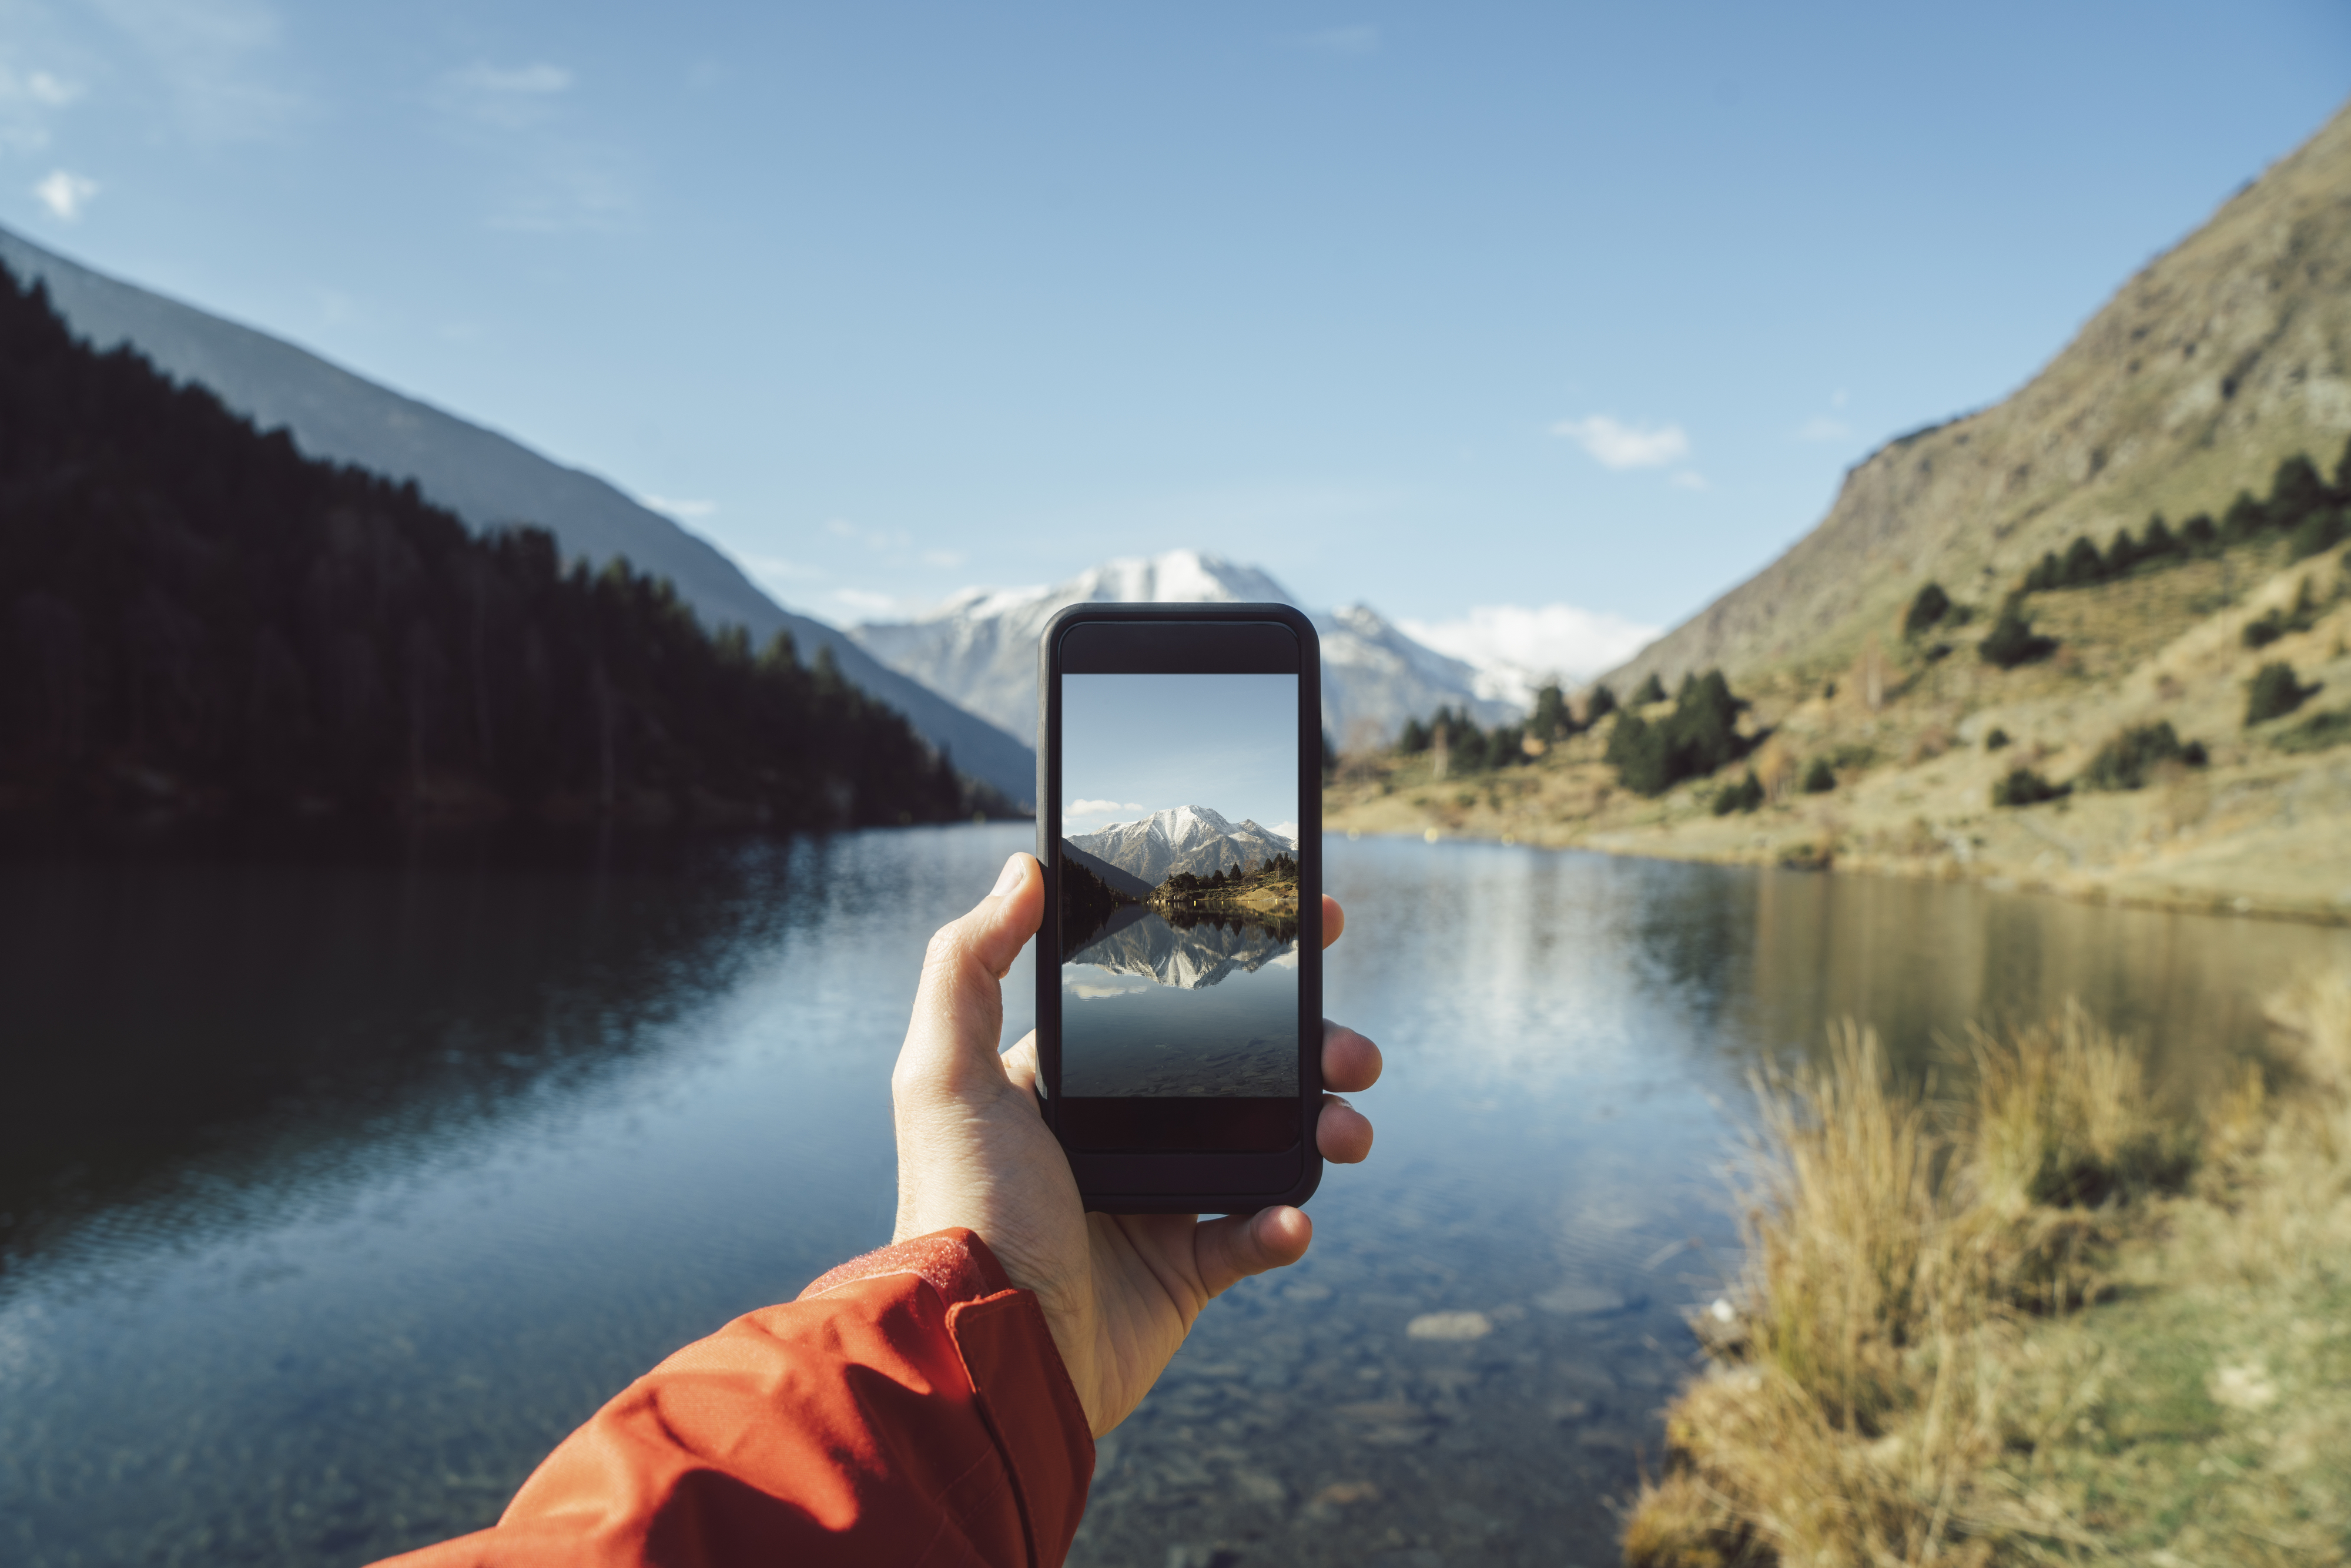 Hand holding a smartphone capturing a mountain and lake scene